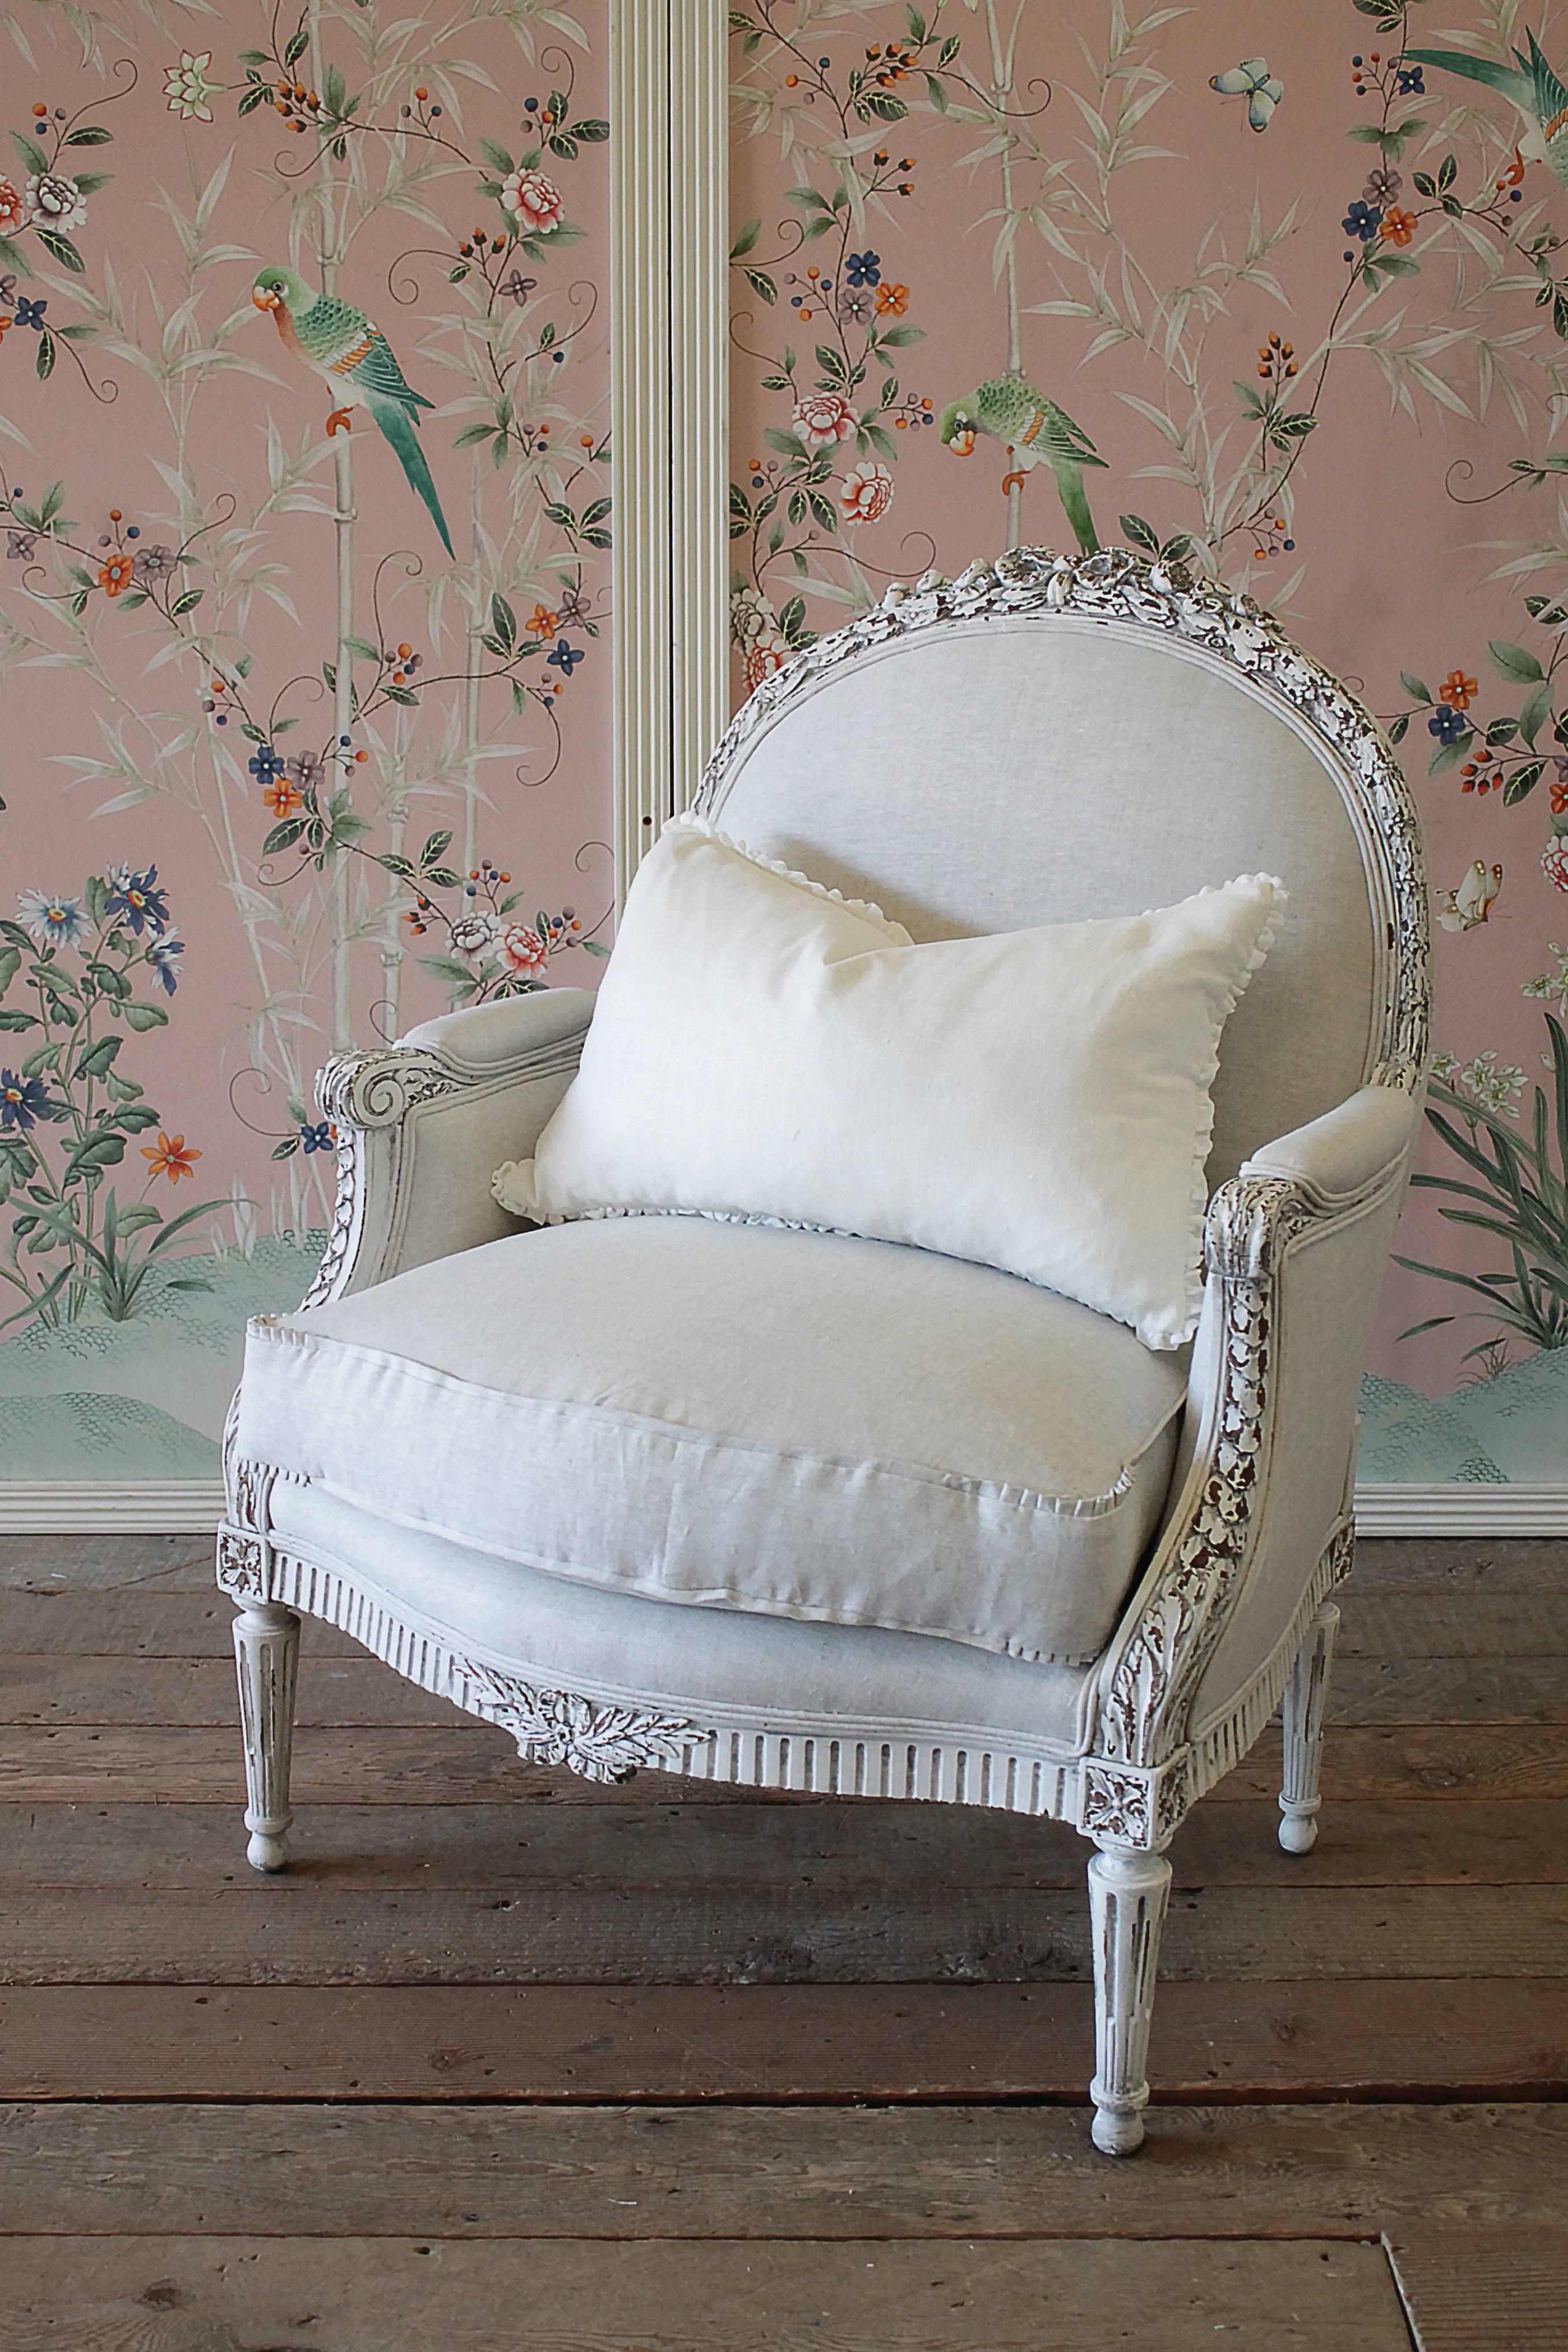 Early 20th century carved and painted Louis XVI style bergere chair painted in our soft oyster white finish, distressed edges and finished with an antique glazed patina. The painted finish is an off-white, with subtle hues of a grey tone. Large